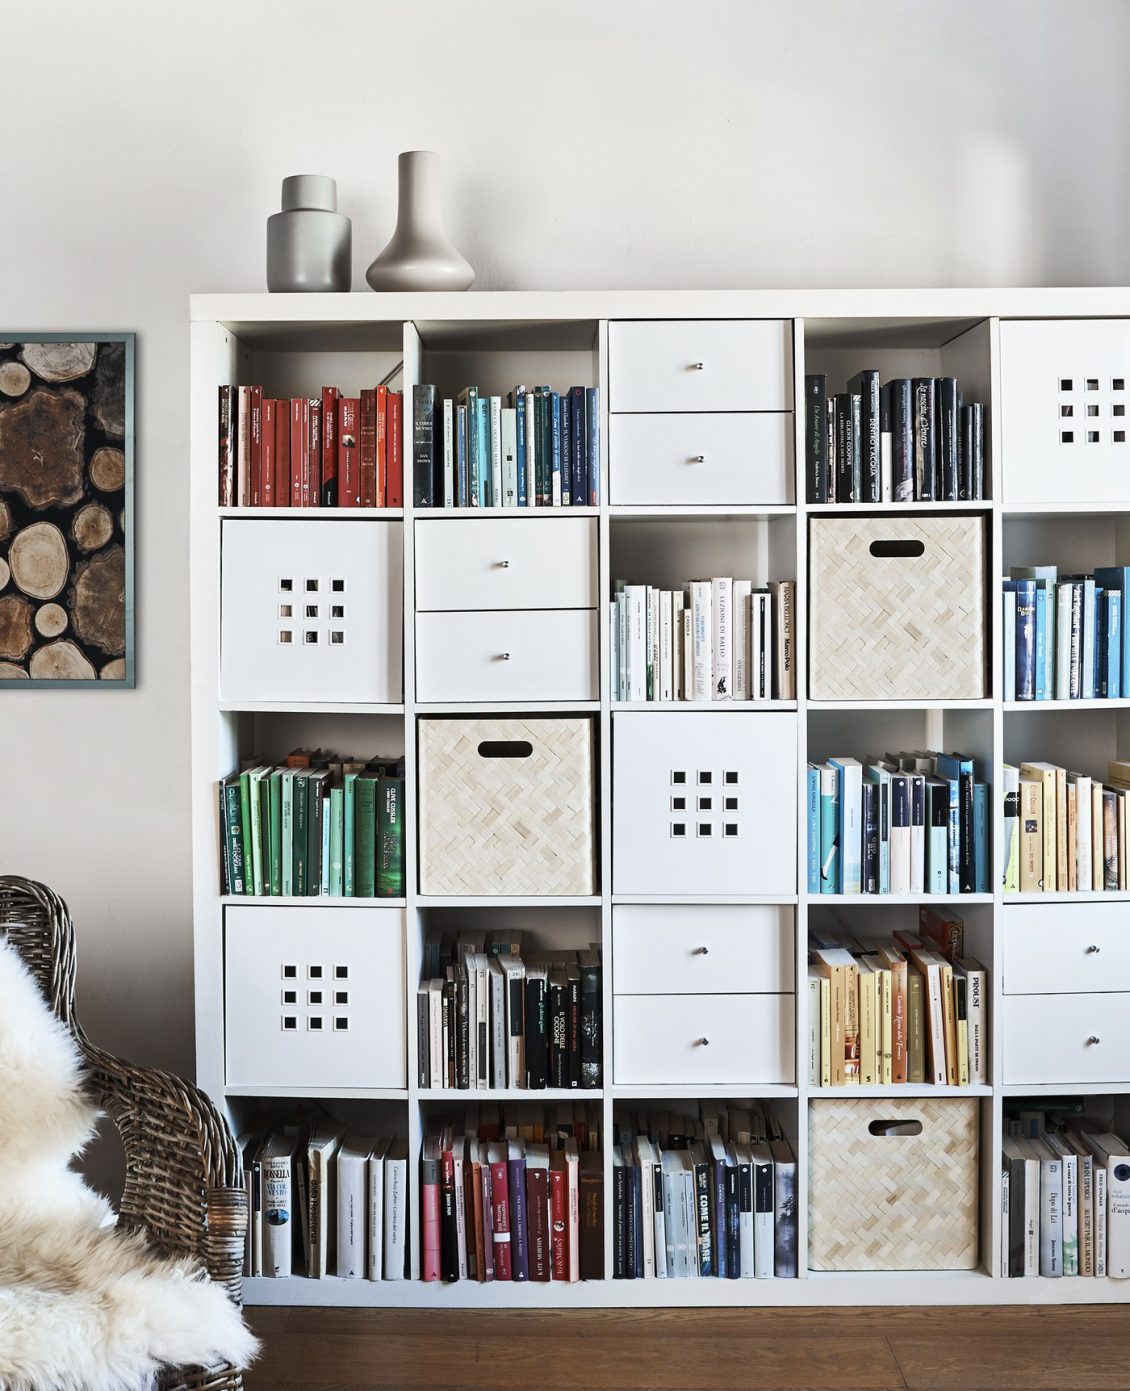 8 Clever Uses For The Ikea Kallax Storage System